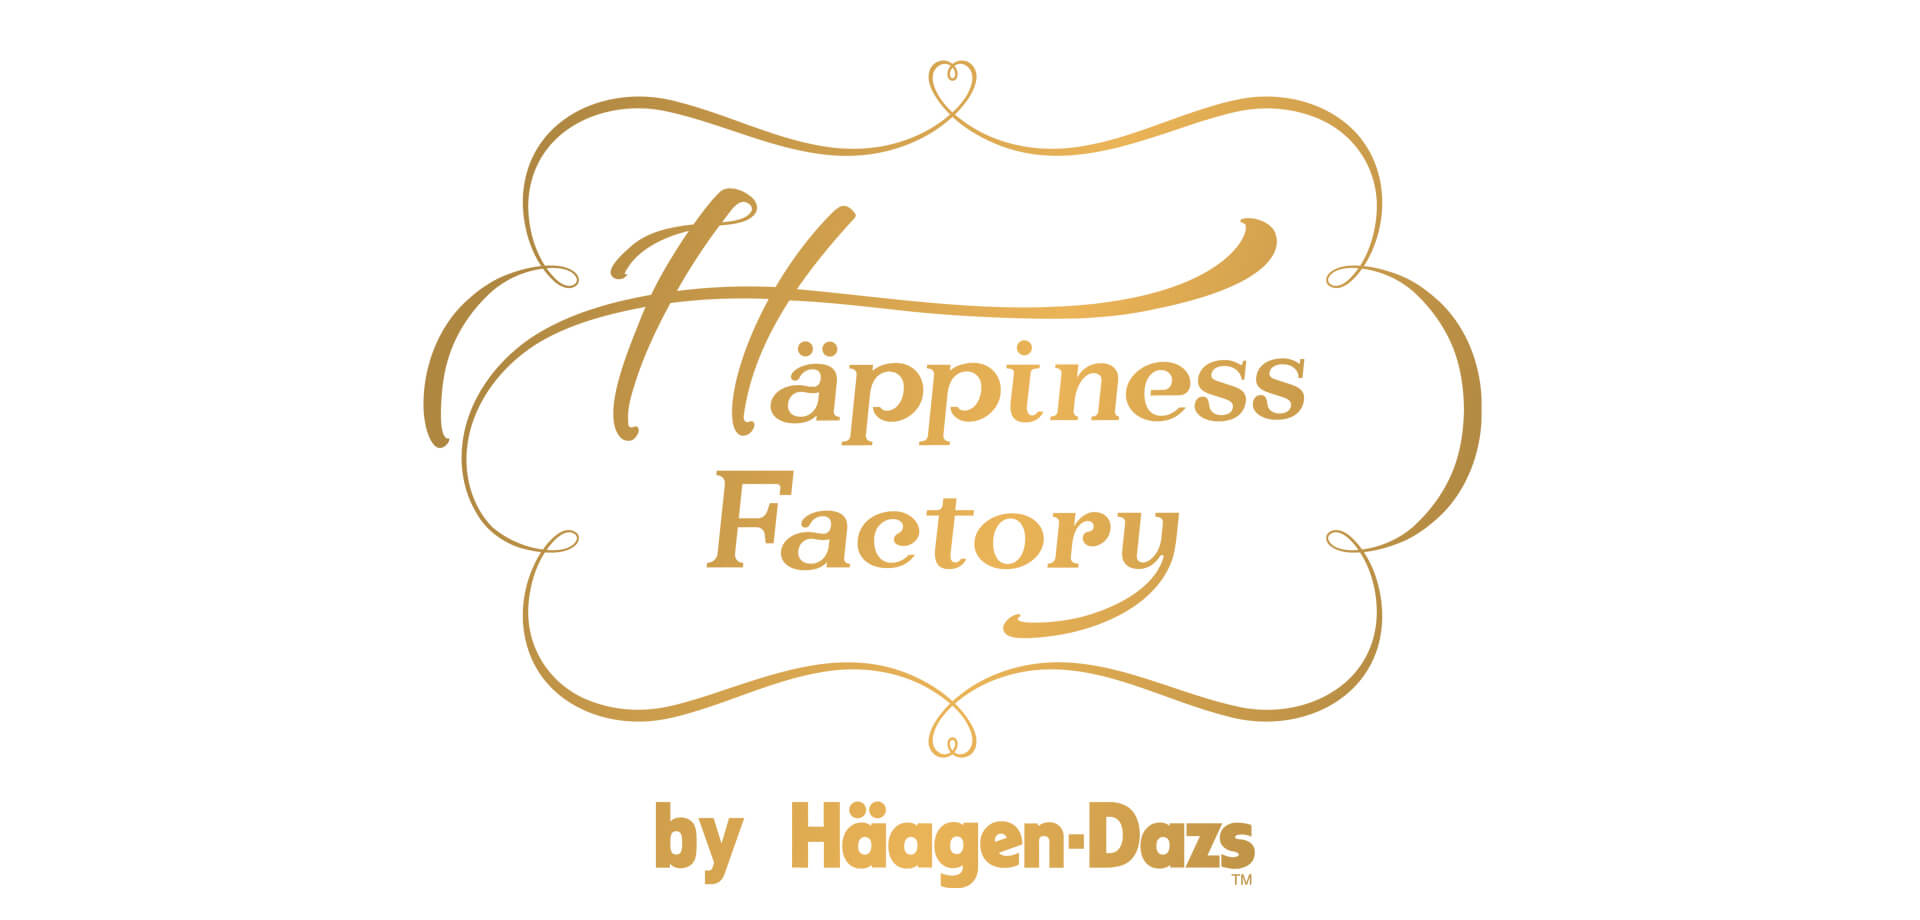 Häppiness Factory（ハピネス ファクトリー） ハーゲンダッツ　ロゴ